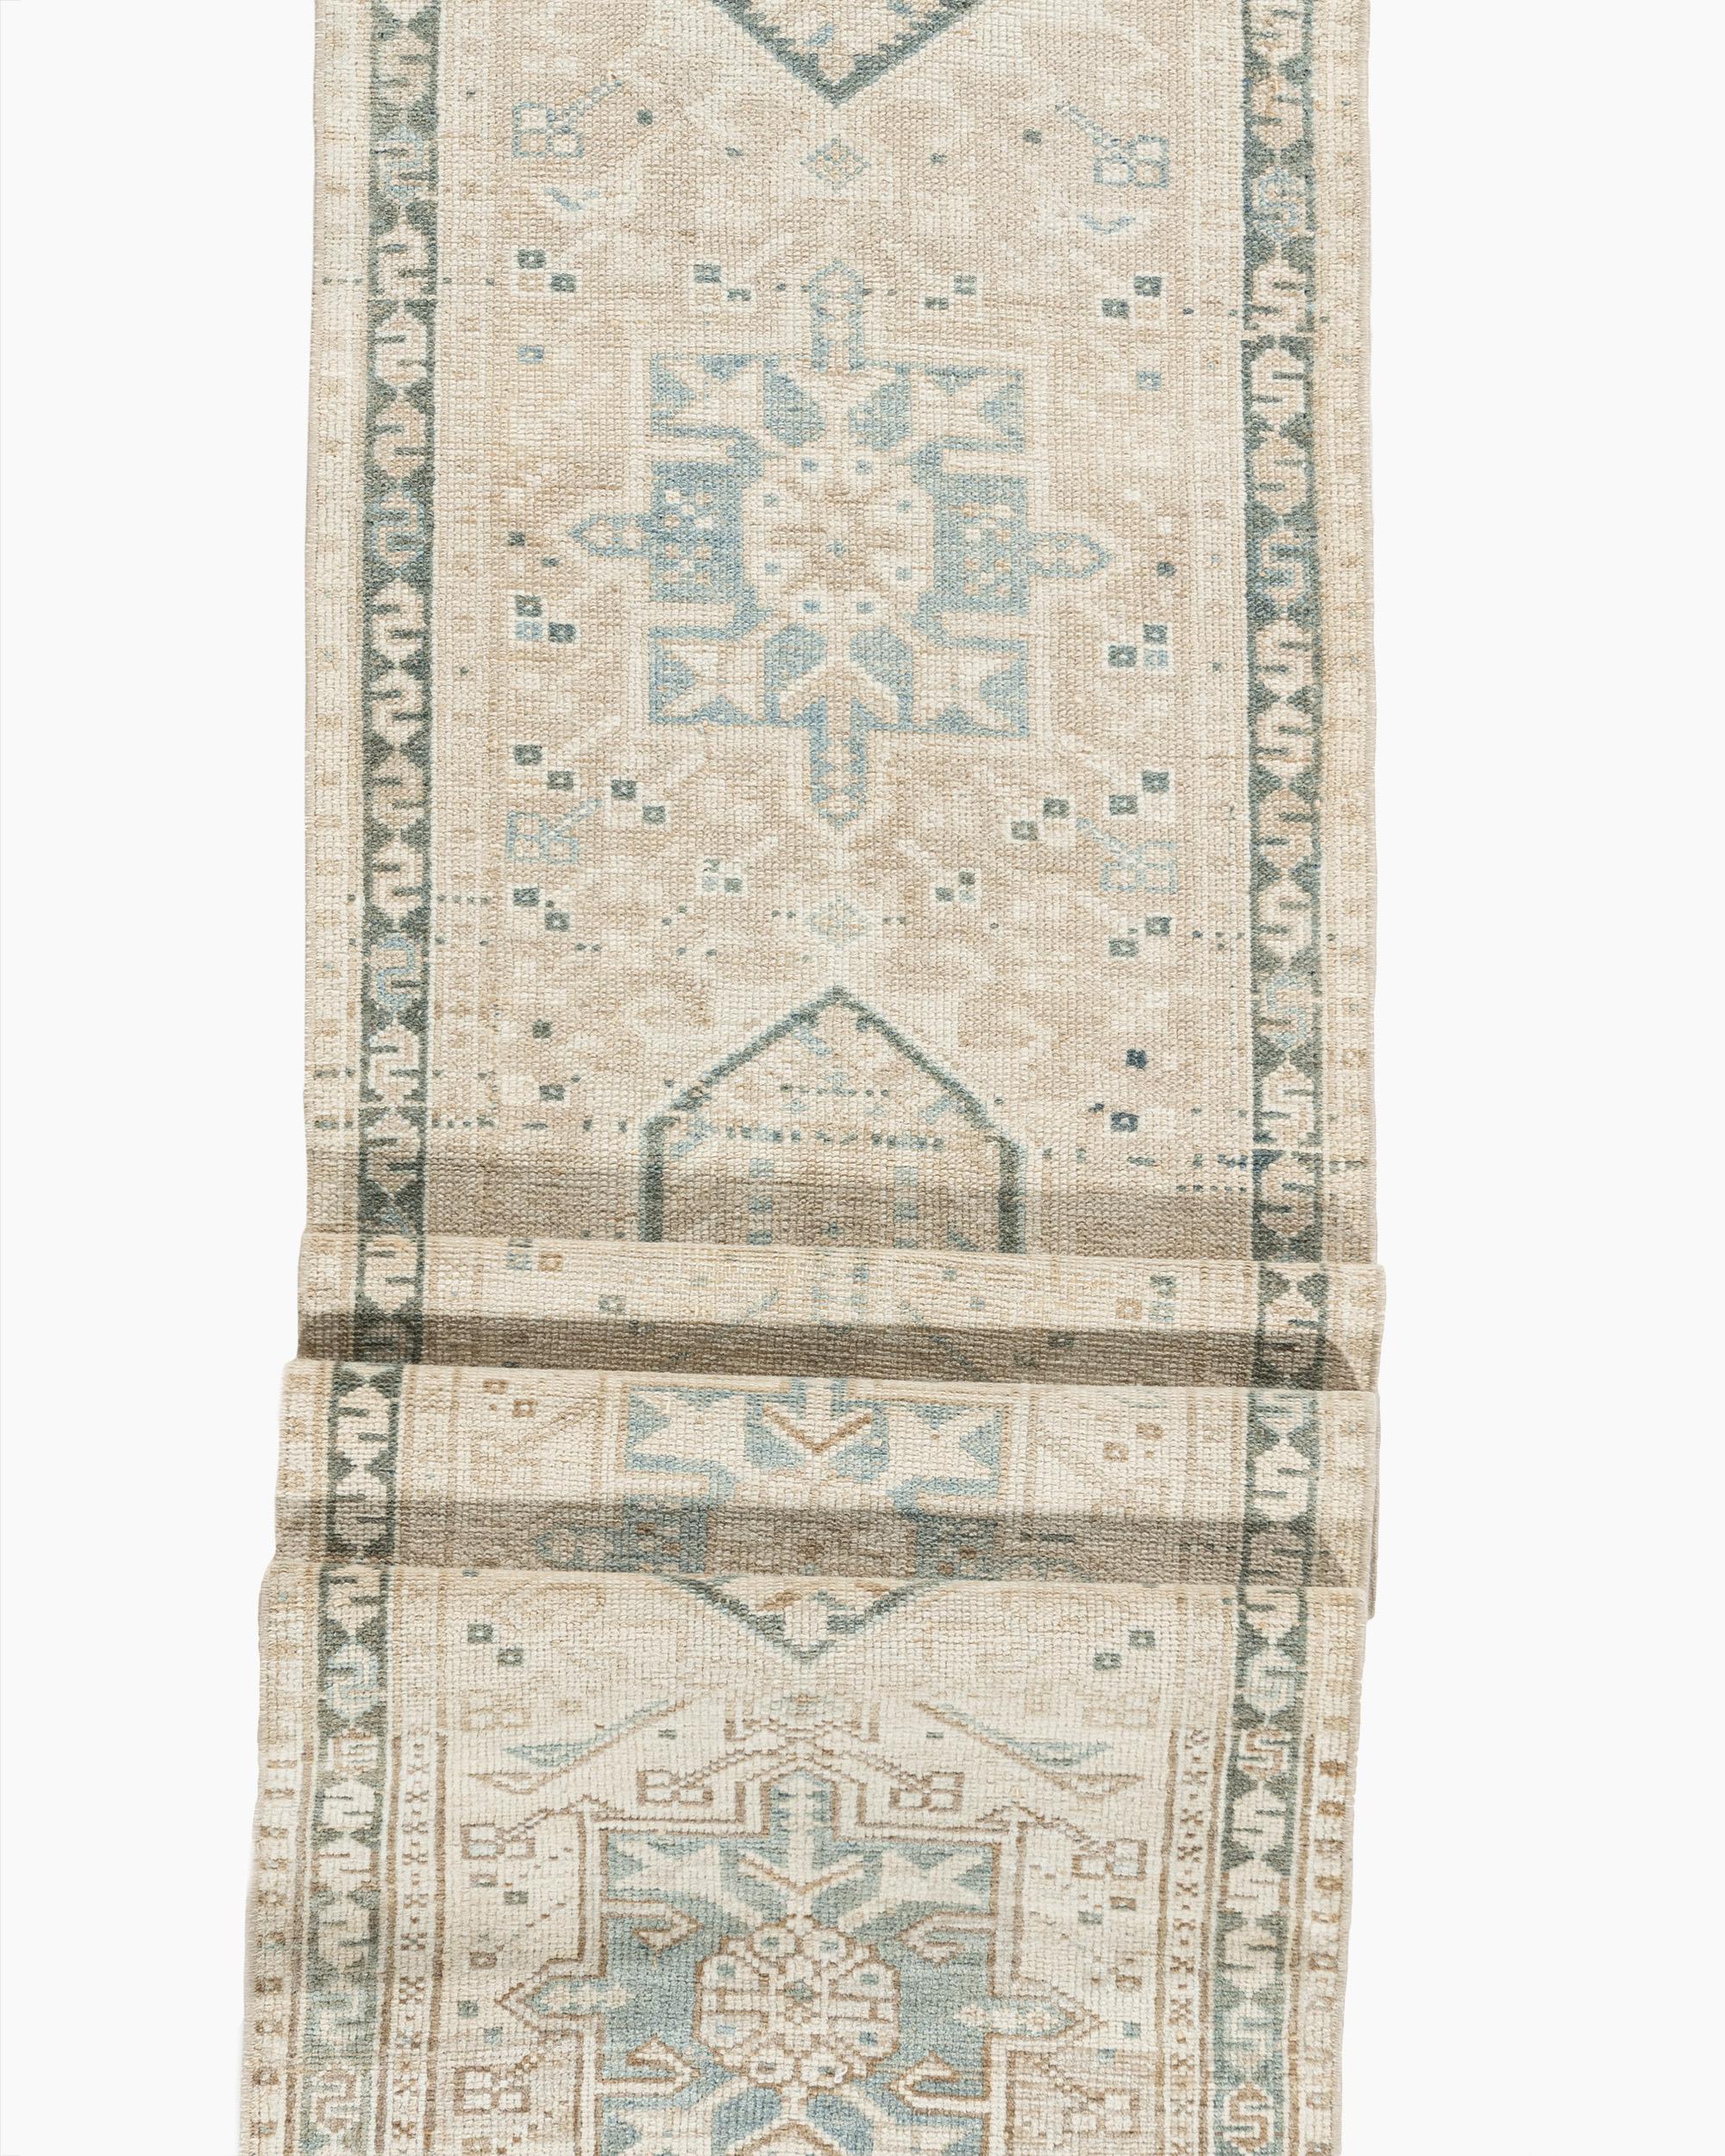 Vintage Persian Heriz Runner 1'10 X 12'8. The Heriz district of NW Persia has been weaving carpets for over a century, with geometric designs and tonalities ranging from mellow to saturated. Medallion layouts are by far the most common, but